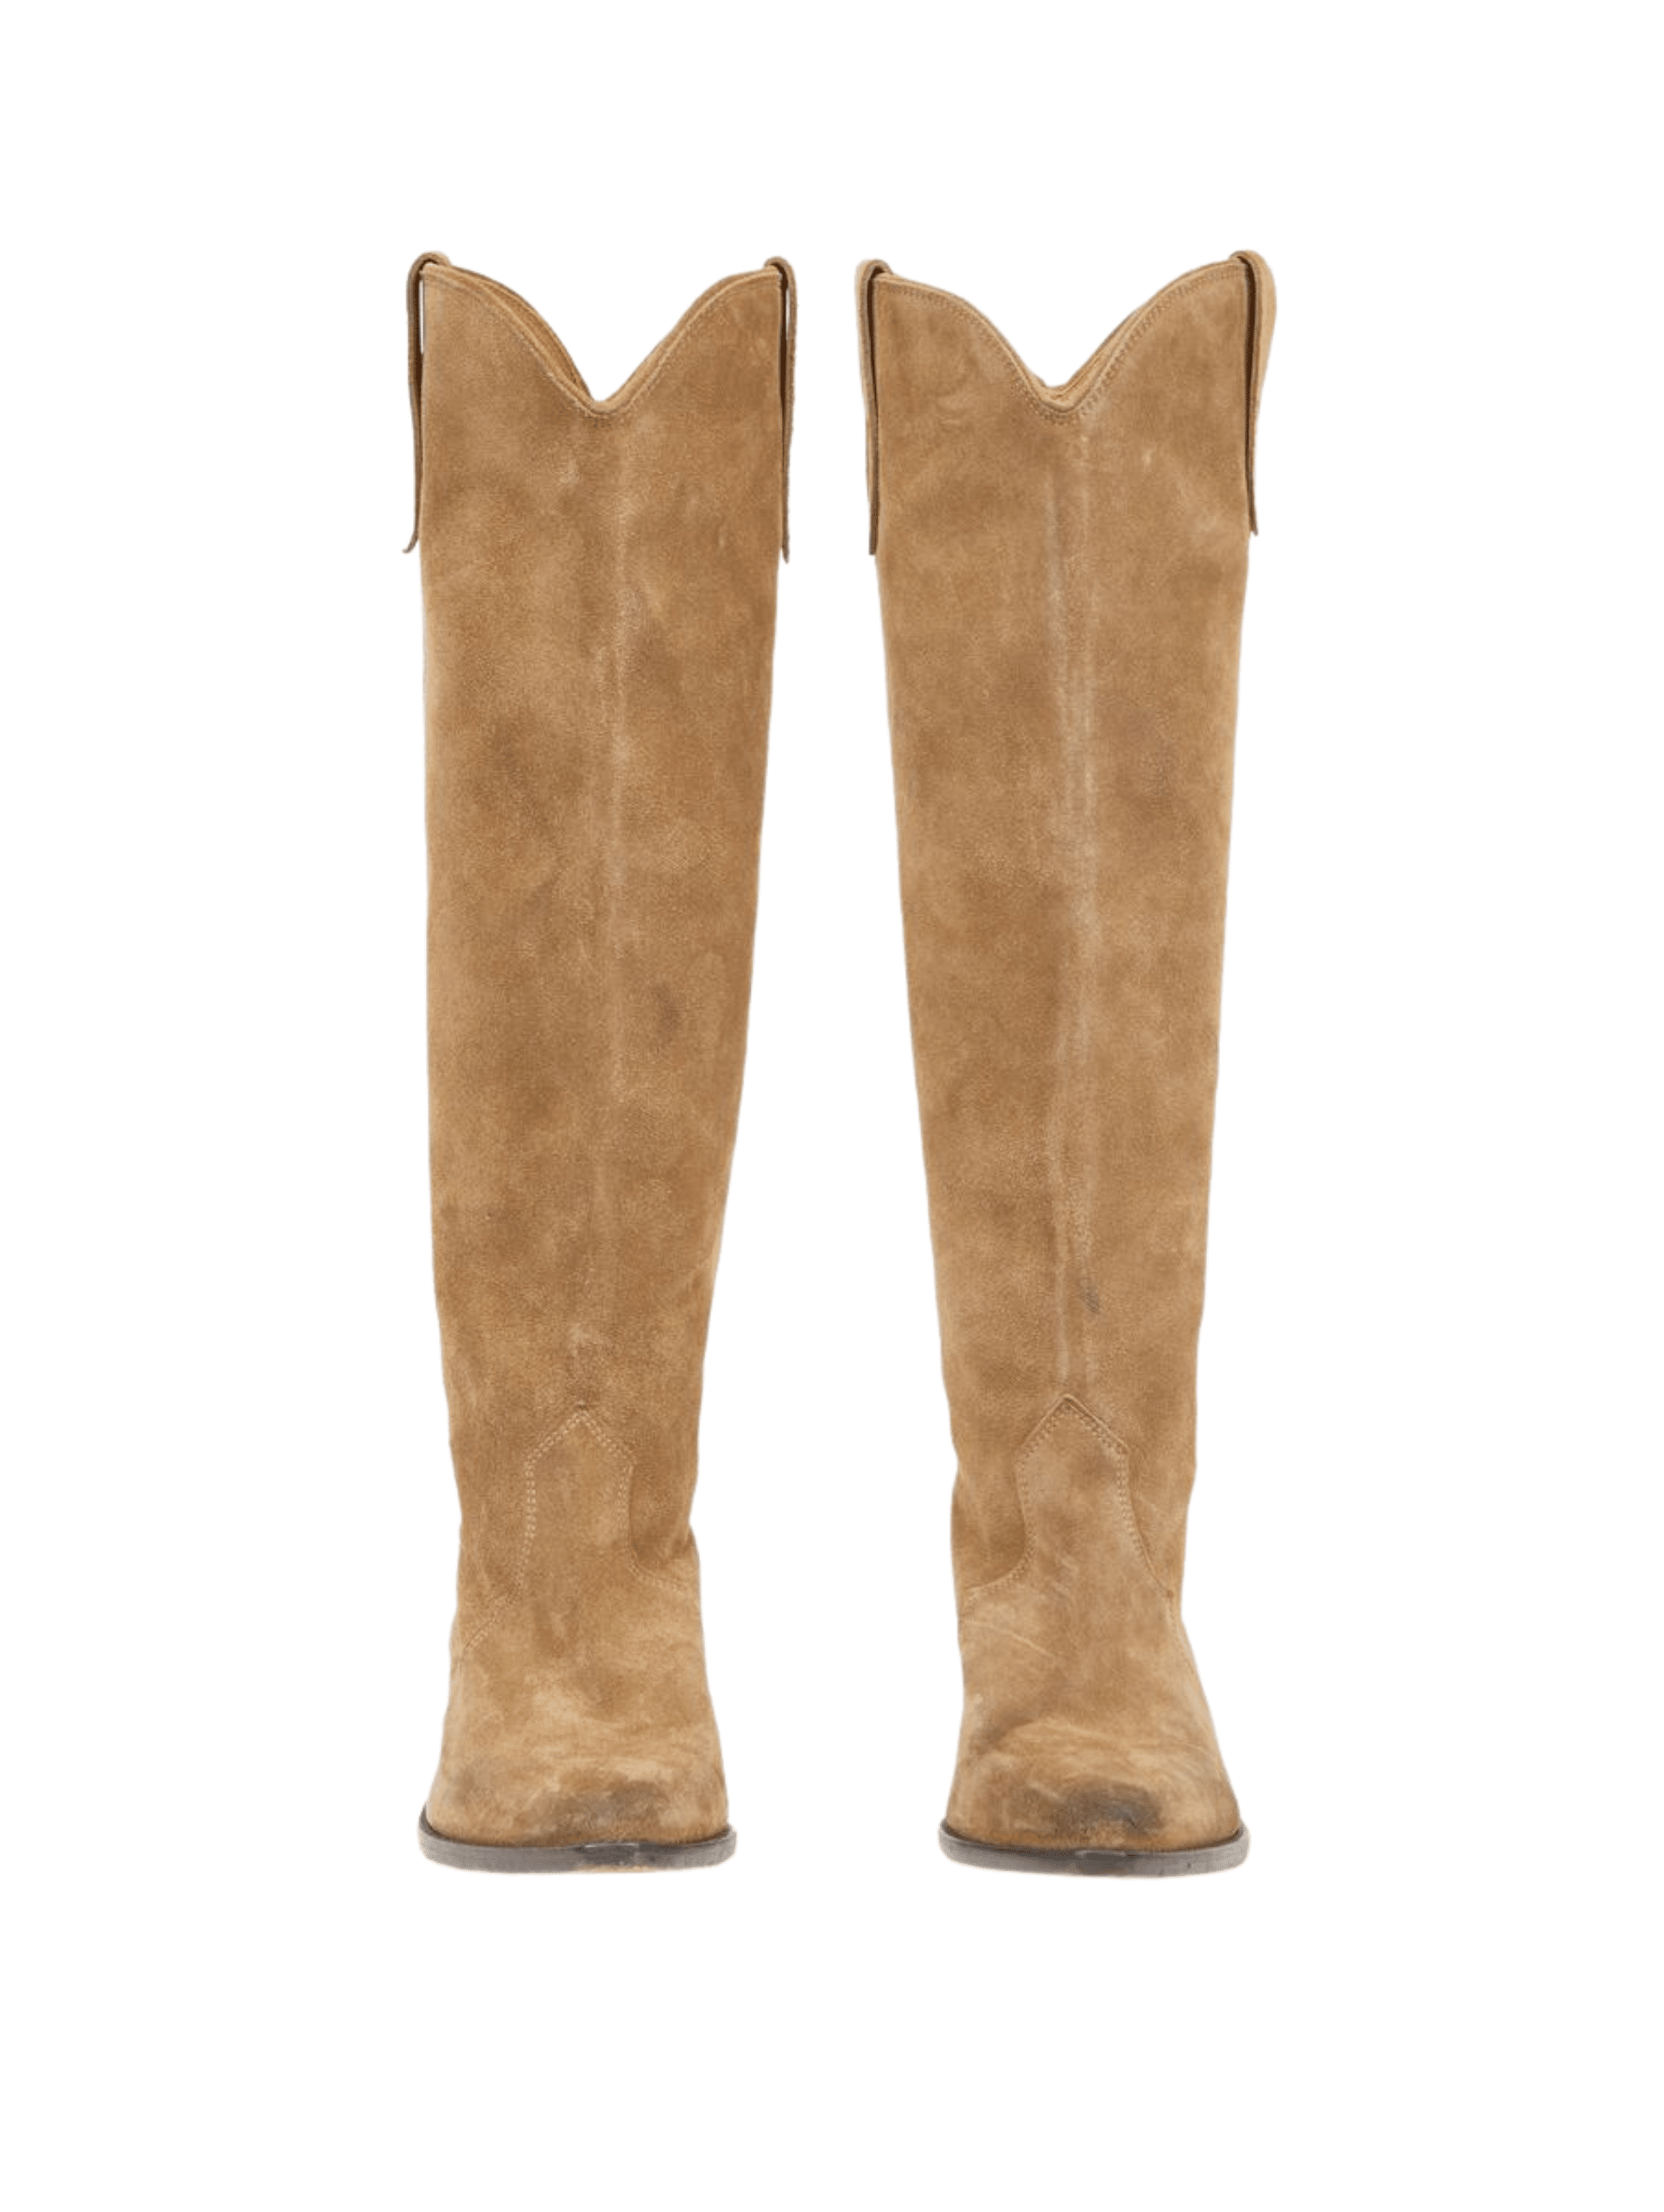 Denvee High Boots / Taupe - Seletti Concept Store